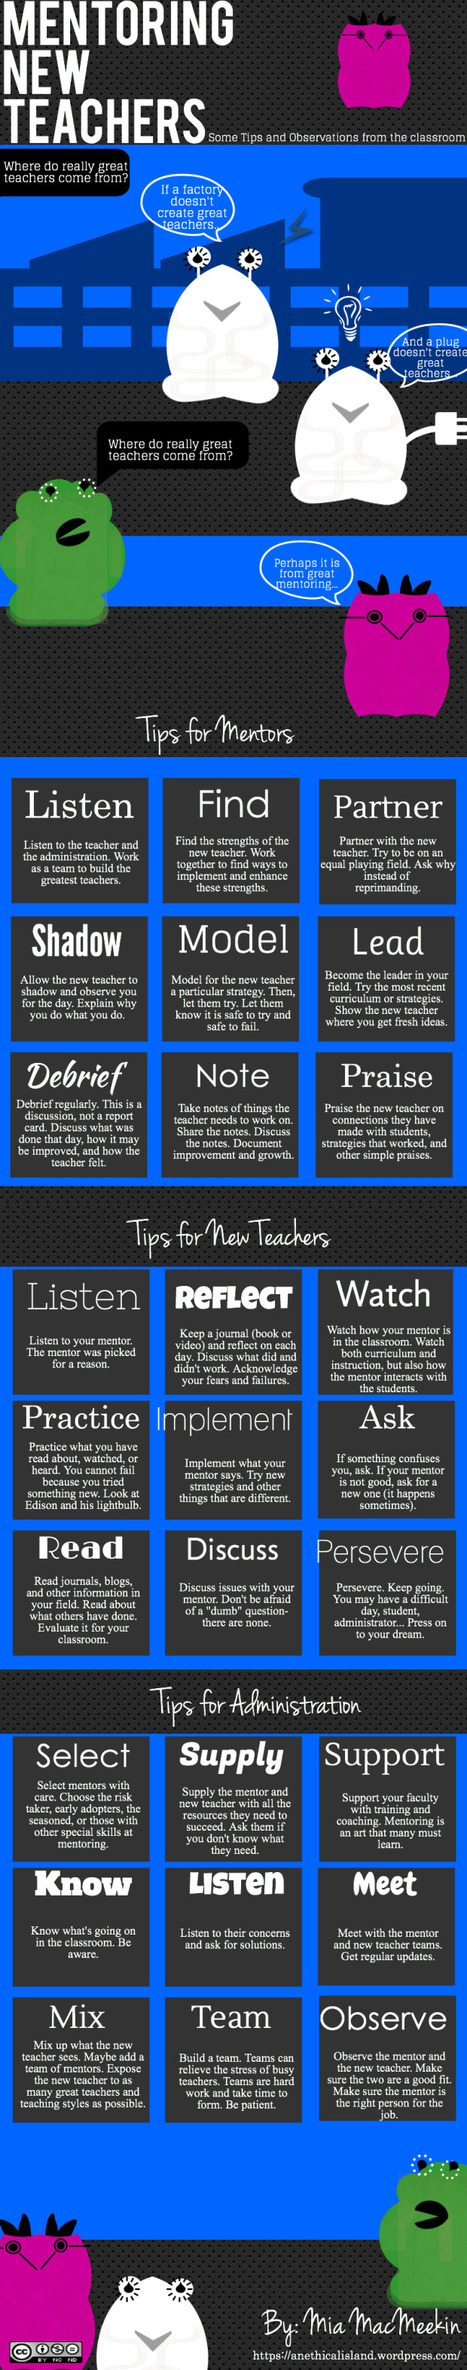 27 Tips For Mentoring New Teachers [Infographic] | Strictly pedagogical | Scoop.it